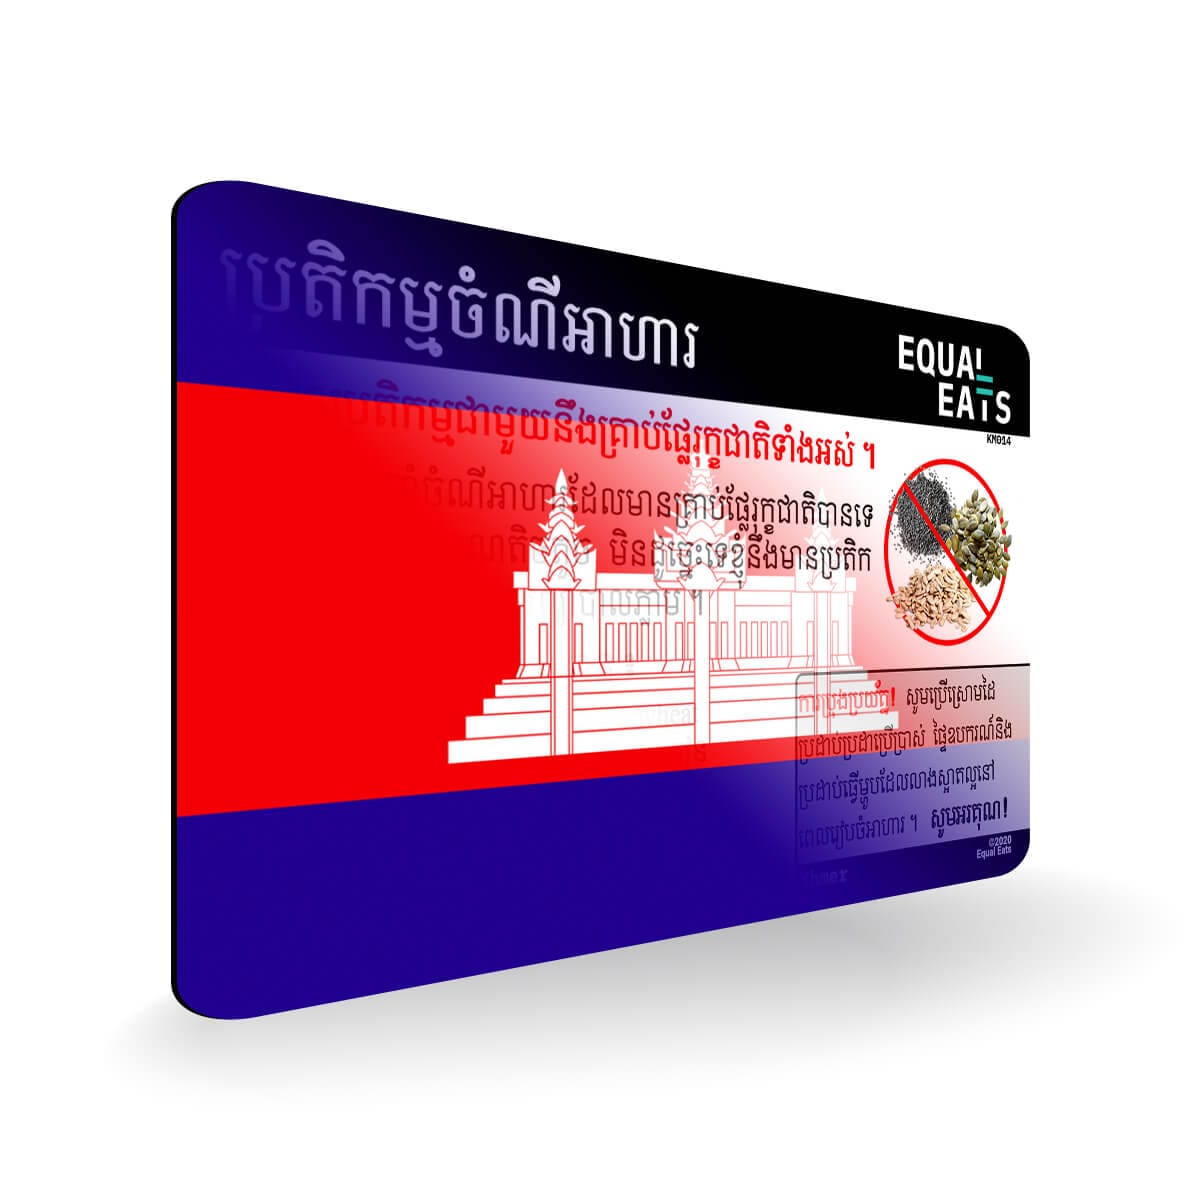 Seed Allergy in Khmer. Seed Allergy Card for Cambodia